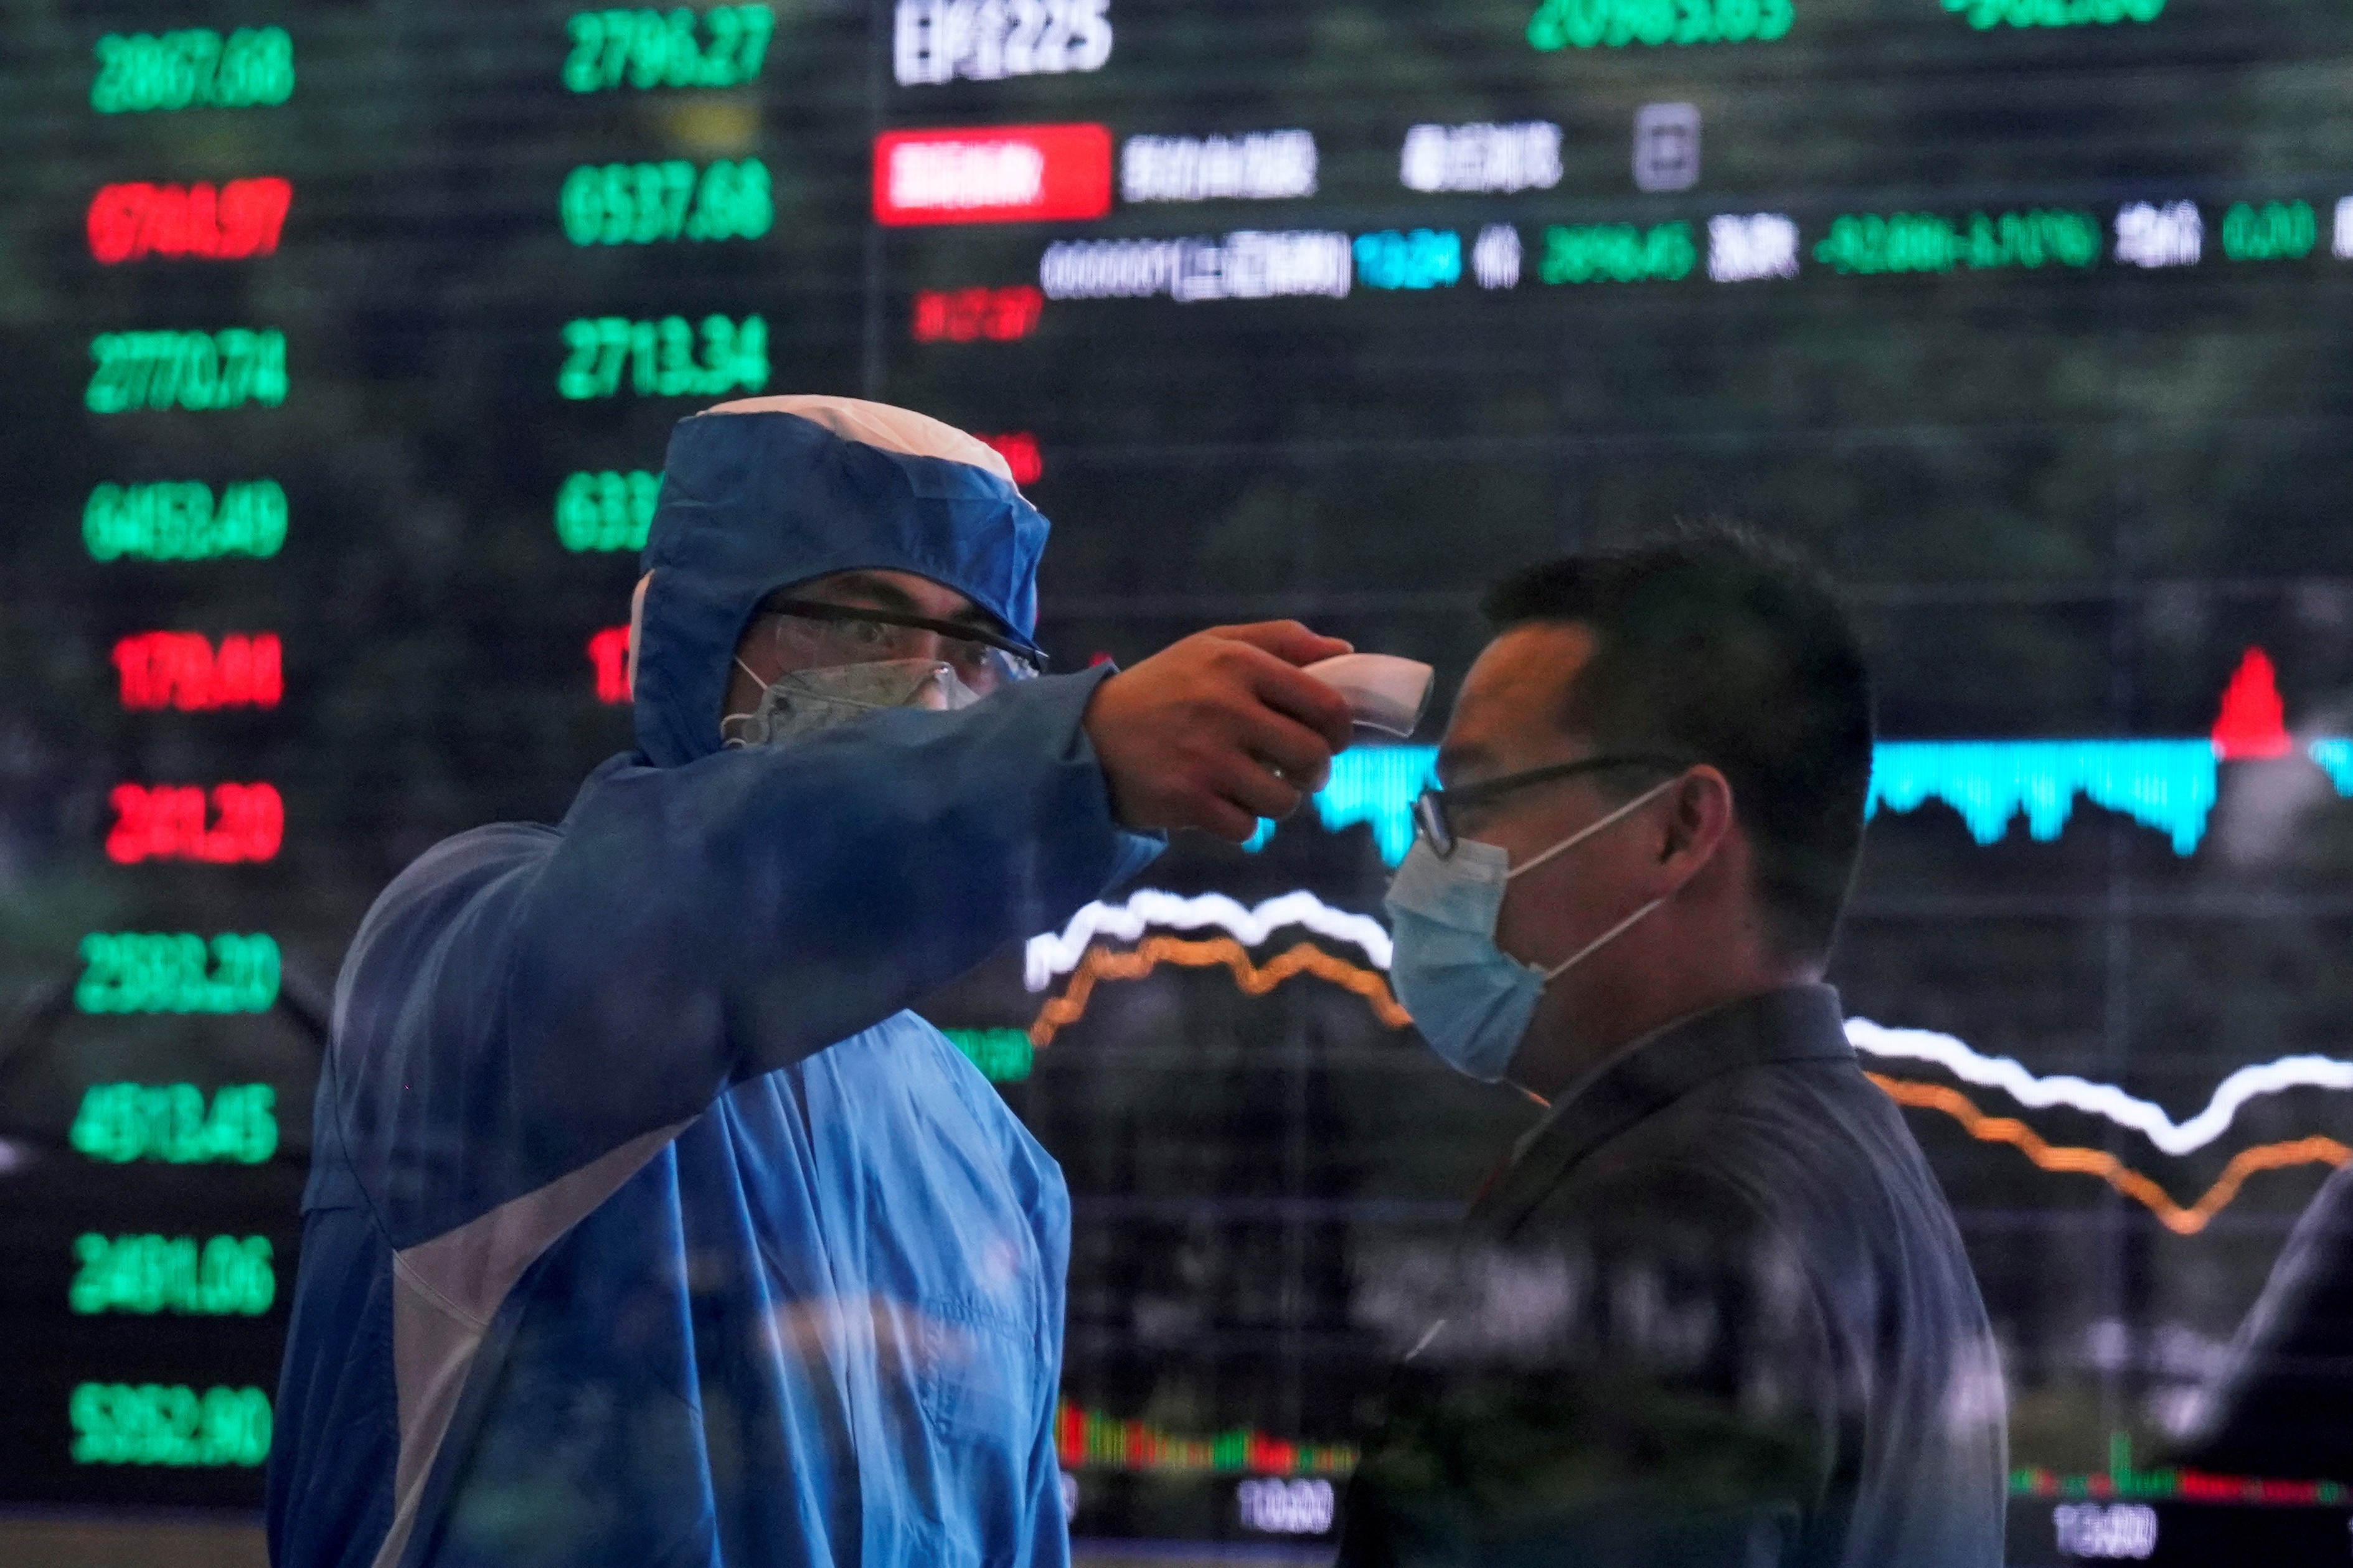 Global financial markets were mixed after the US Federal Reserve’s surprise rate move, with many investors unconvinced that rate cuts alone would be sufficient to stabilise the global economy. Photo: Reuters